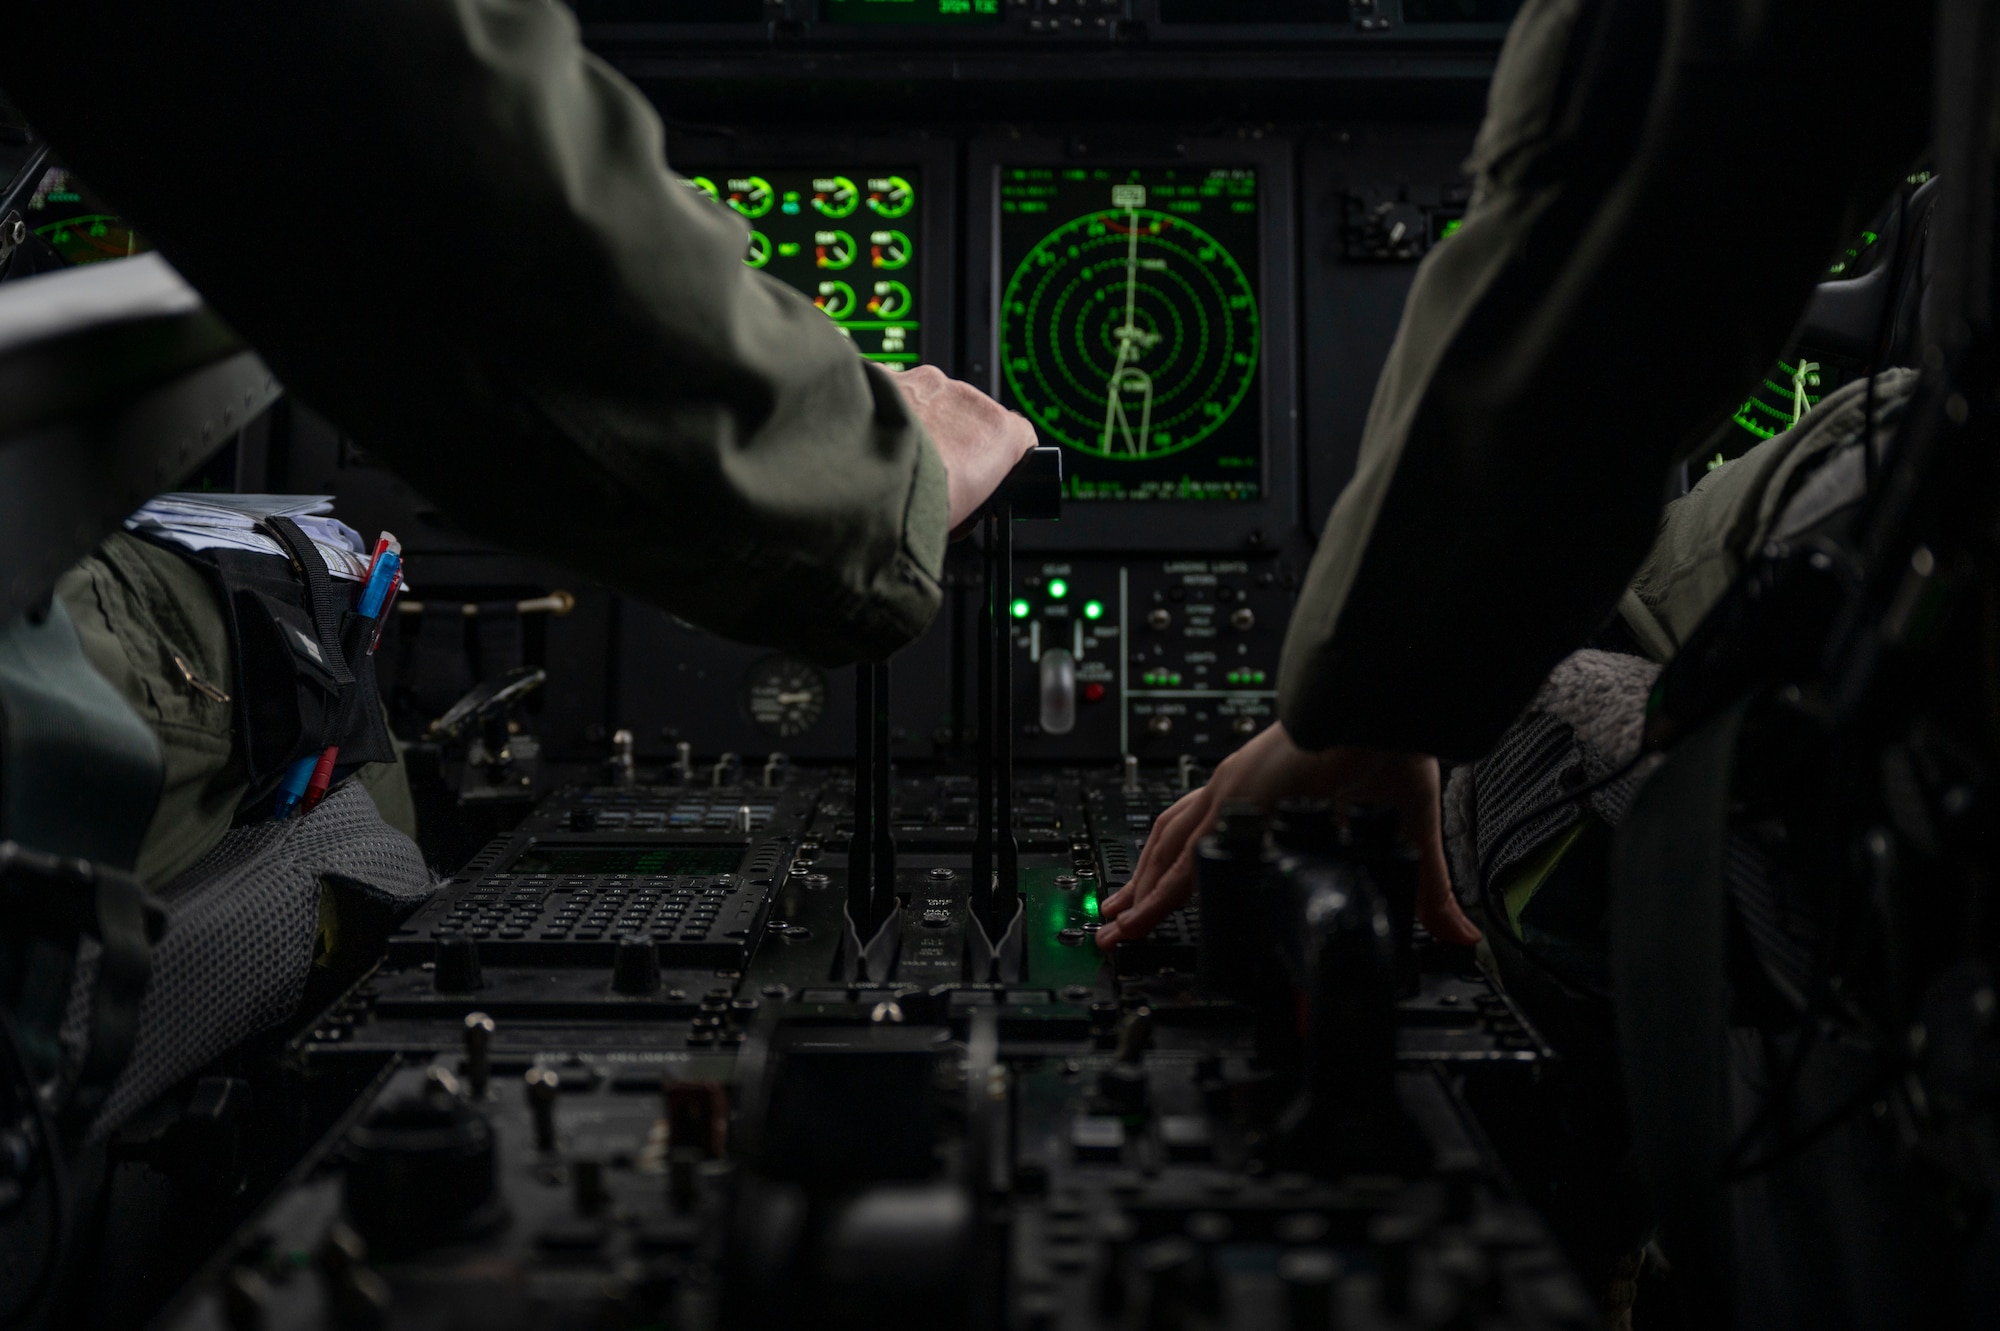 U.S. Air Force Maj. Sandra Salzman, 37th Airlift Squadron C-130J Super Hercules pilot-physician, and Capt. Megan Kraynak, 37th Airlift Squadron C-130J pilot, adjust flight controls while flying over Germany, March 31, 2023.